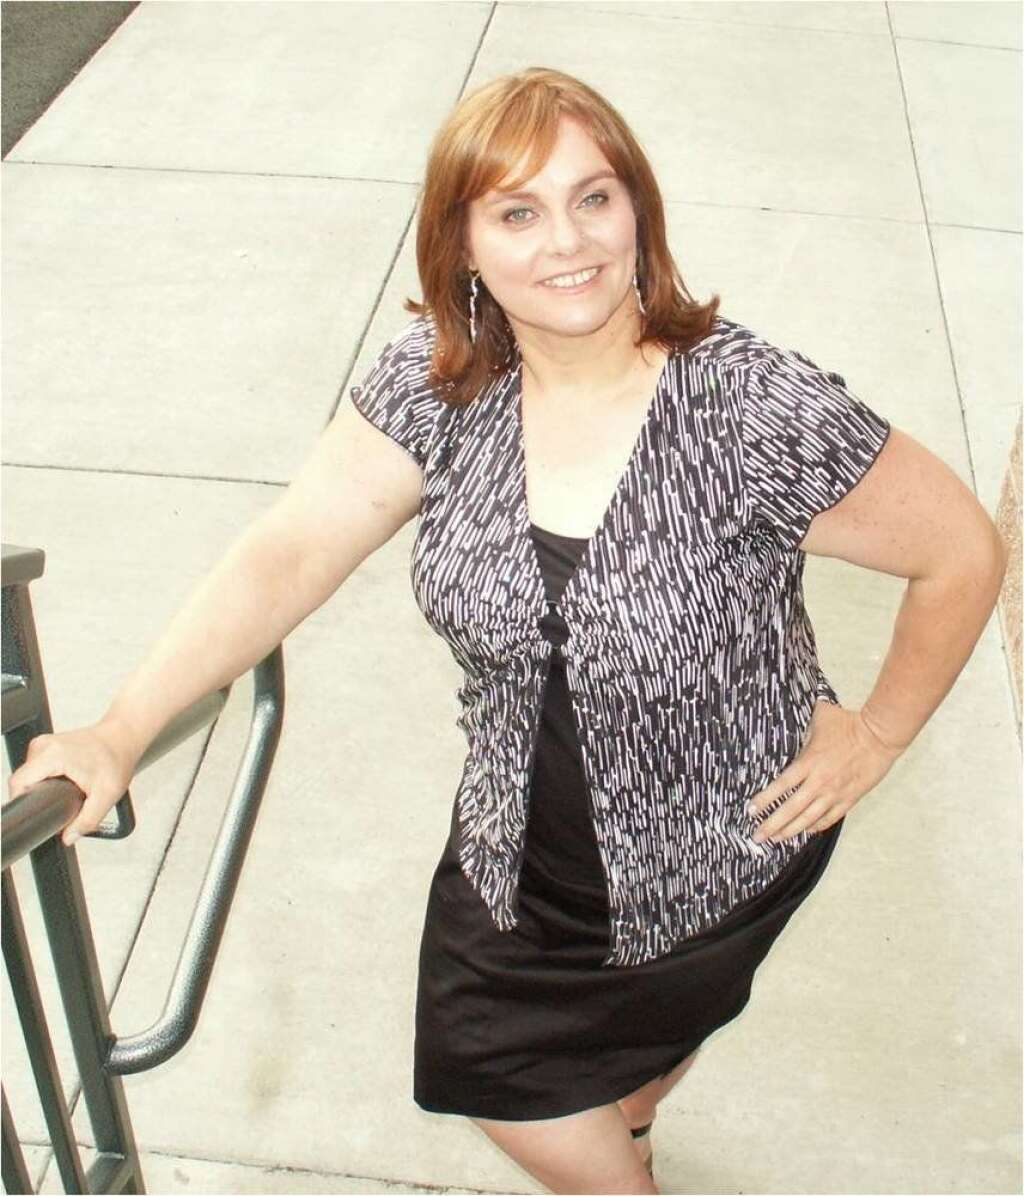 Lori AFTER - <a href="http://www.huffingtonpost.com/2013/01/14/i-lost-weight-lori-yates_n_2426142.html">Read Lori's story here.</a>